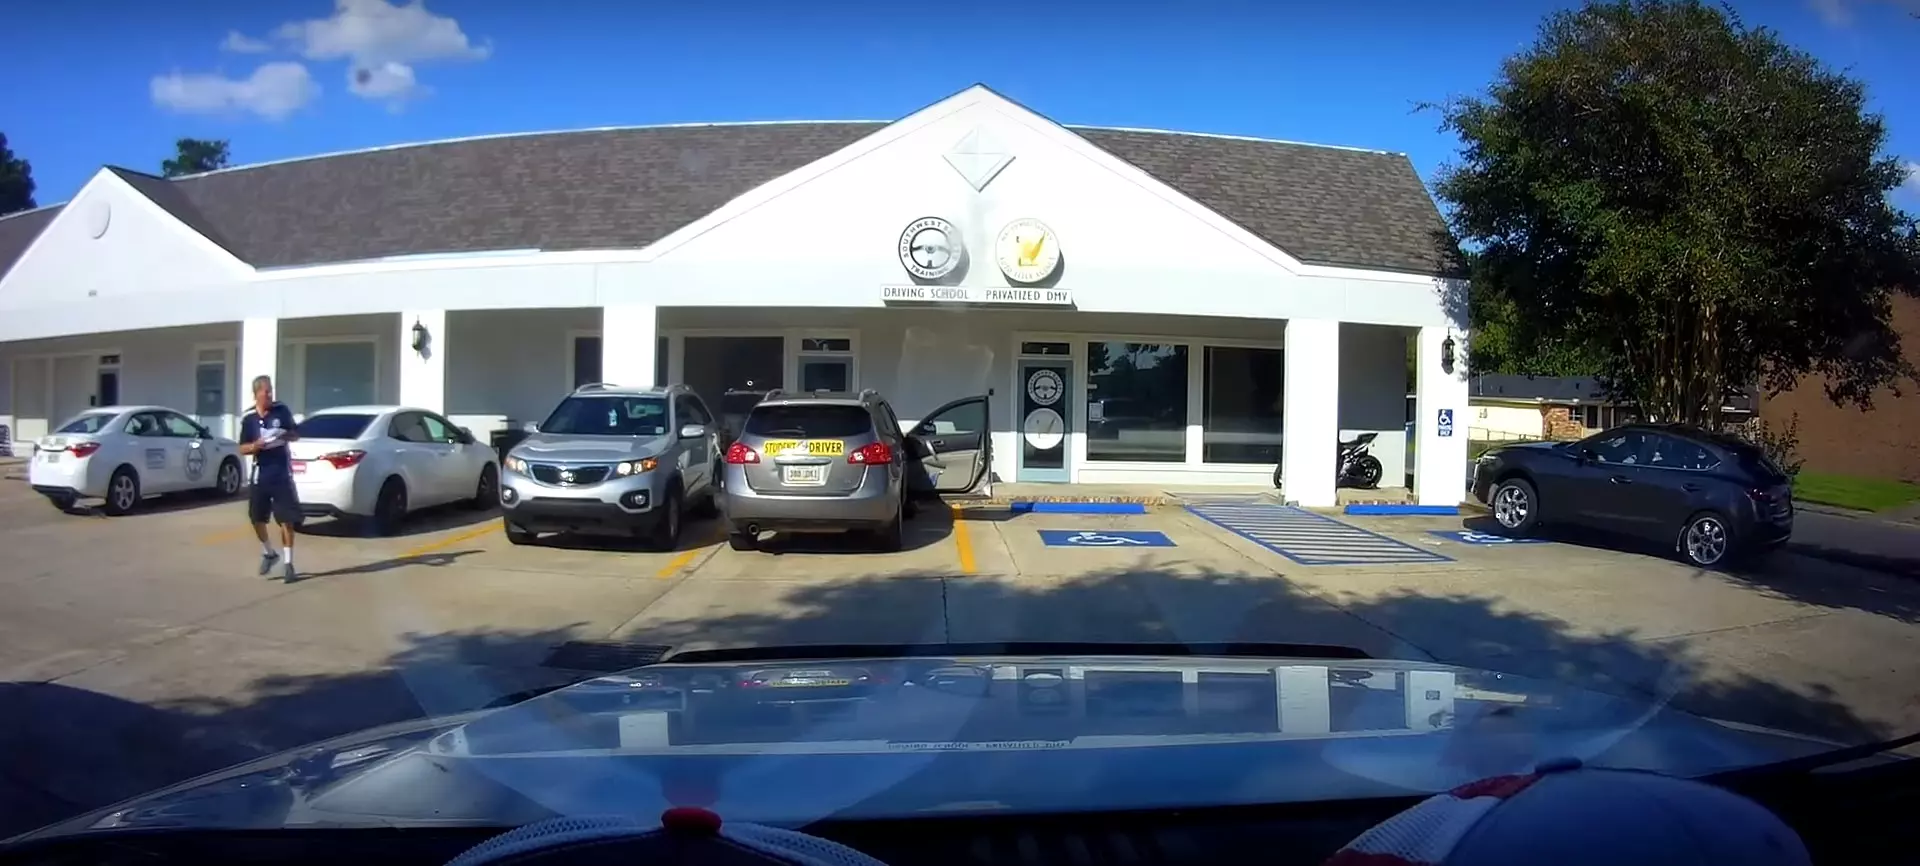 New Hire at Driving School Crashes Car into 'Learn to Drive' Facility